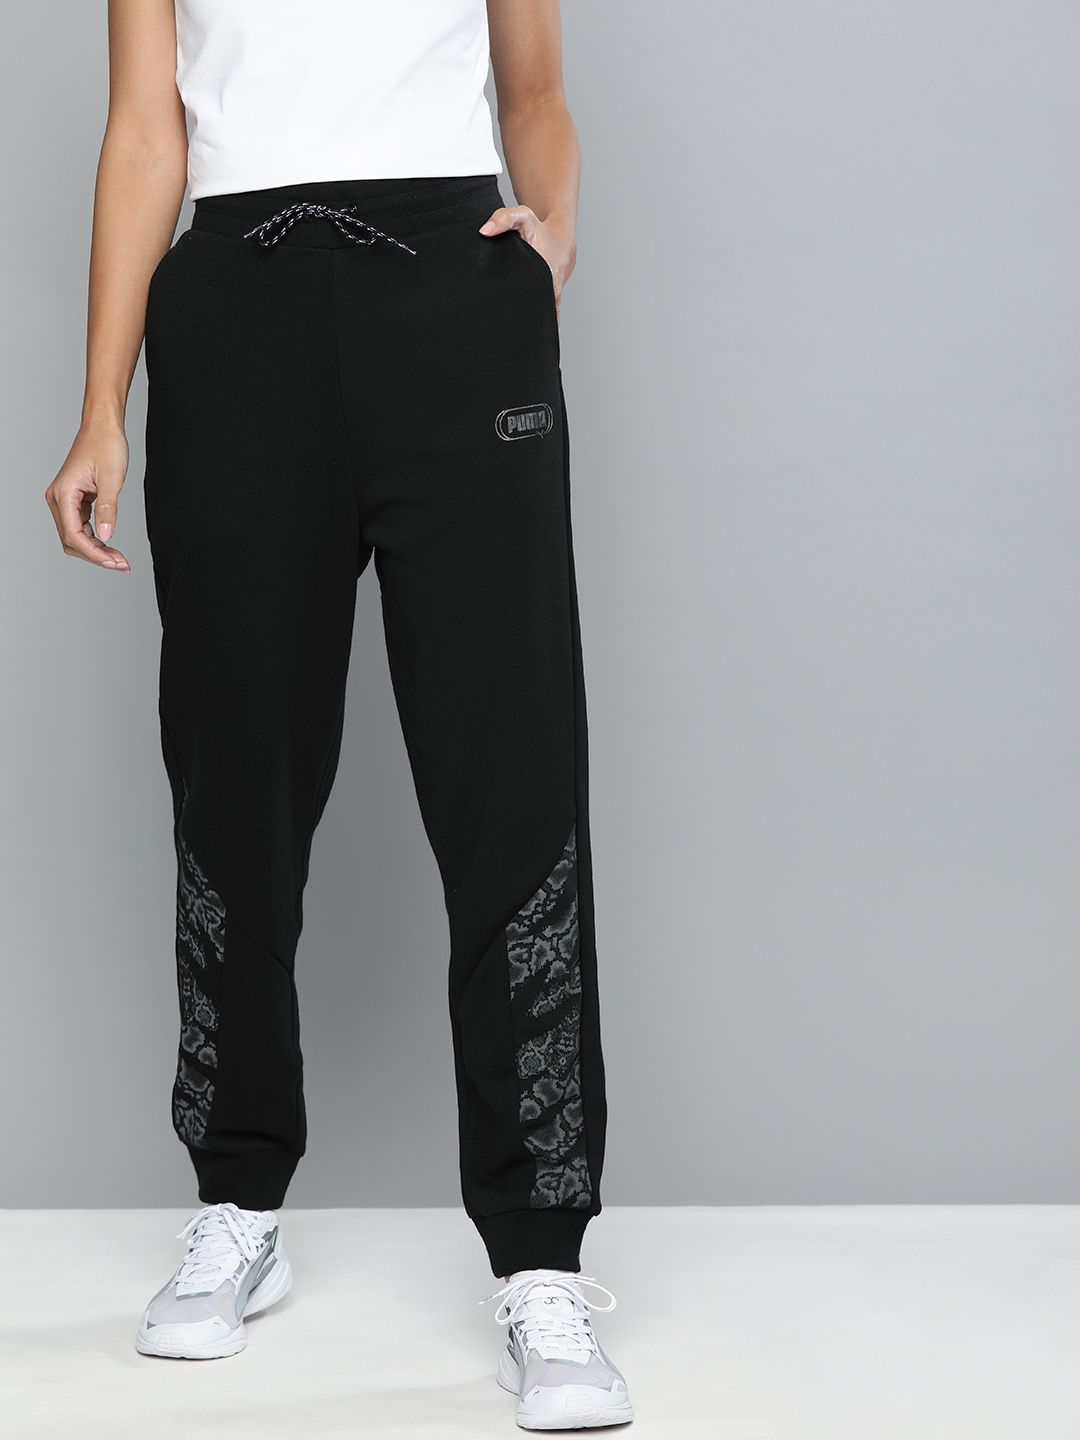 Puma Women Black Solid Regular Fit Rebel High Waist Pants TR cl Joggers Price in India